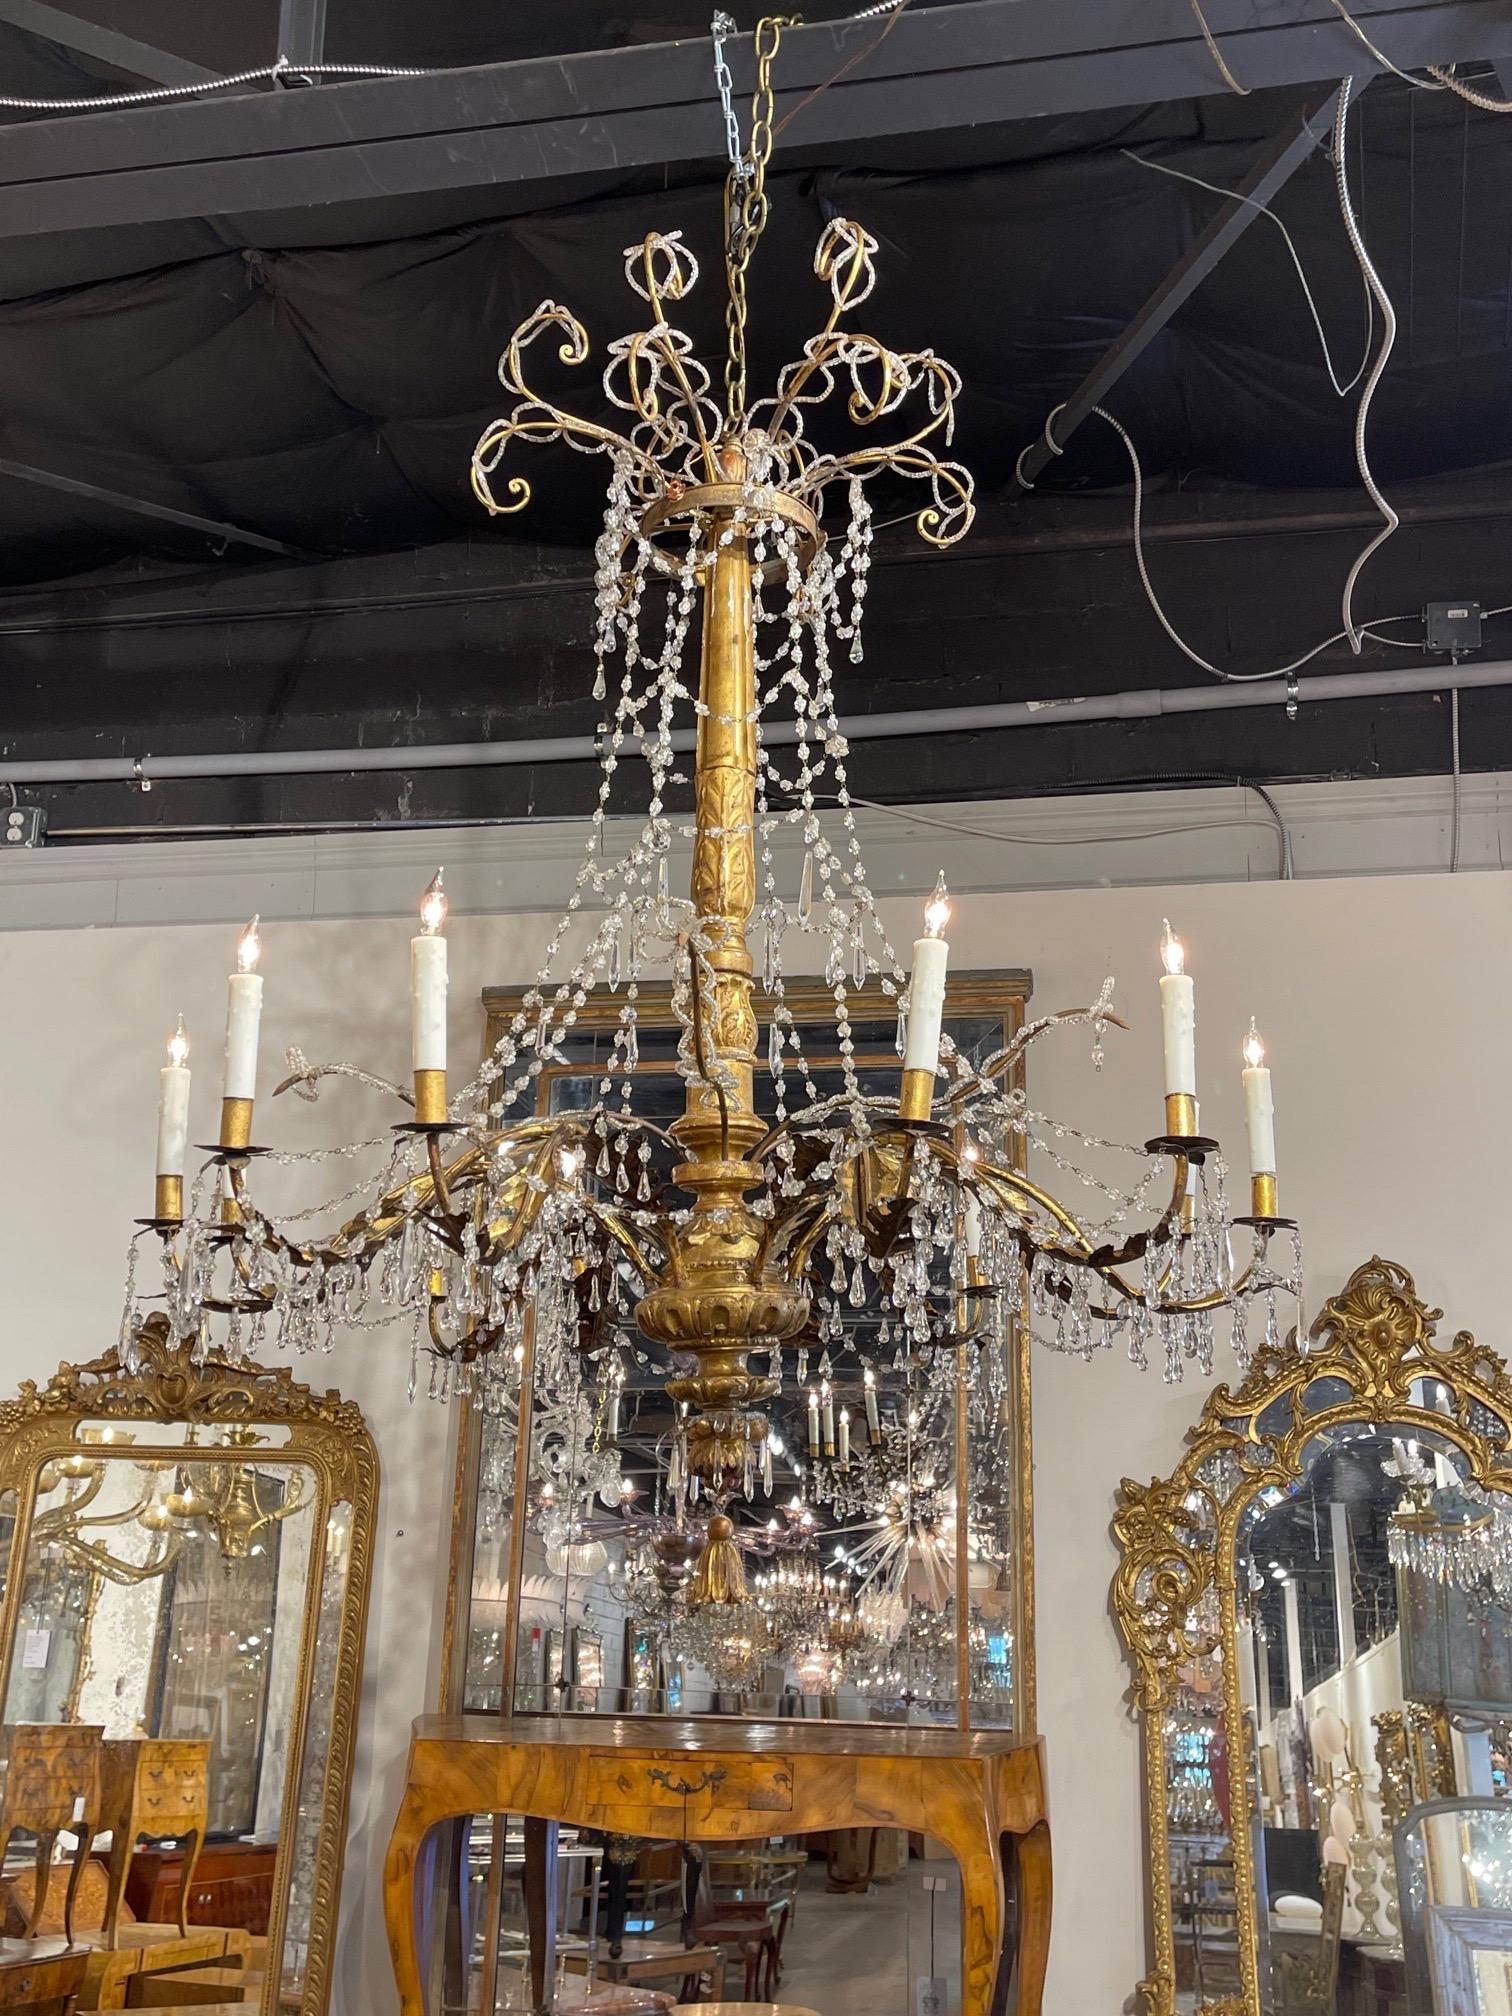 Very fine 18th century Italian large scale giltwood and beaded crystal chandelier with 18 lights. Beautiful carved base and pretty dangling crystals. Creates a nice light and airy feel. Impressive!